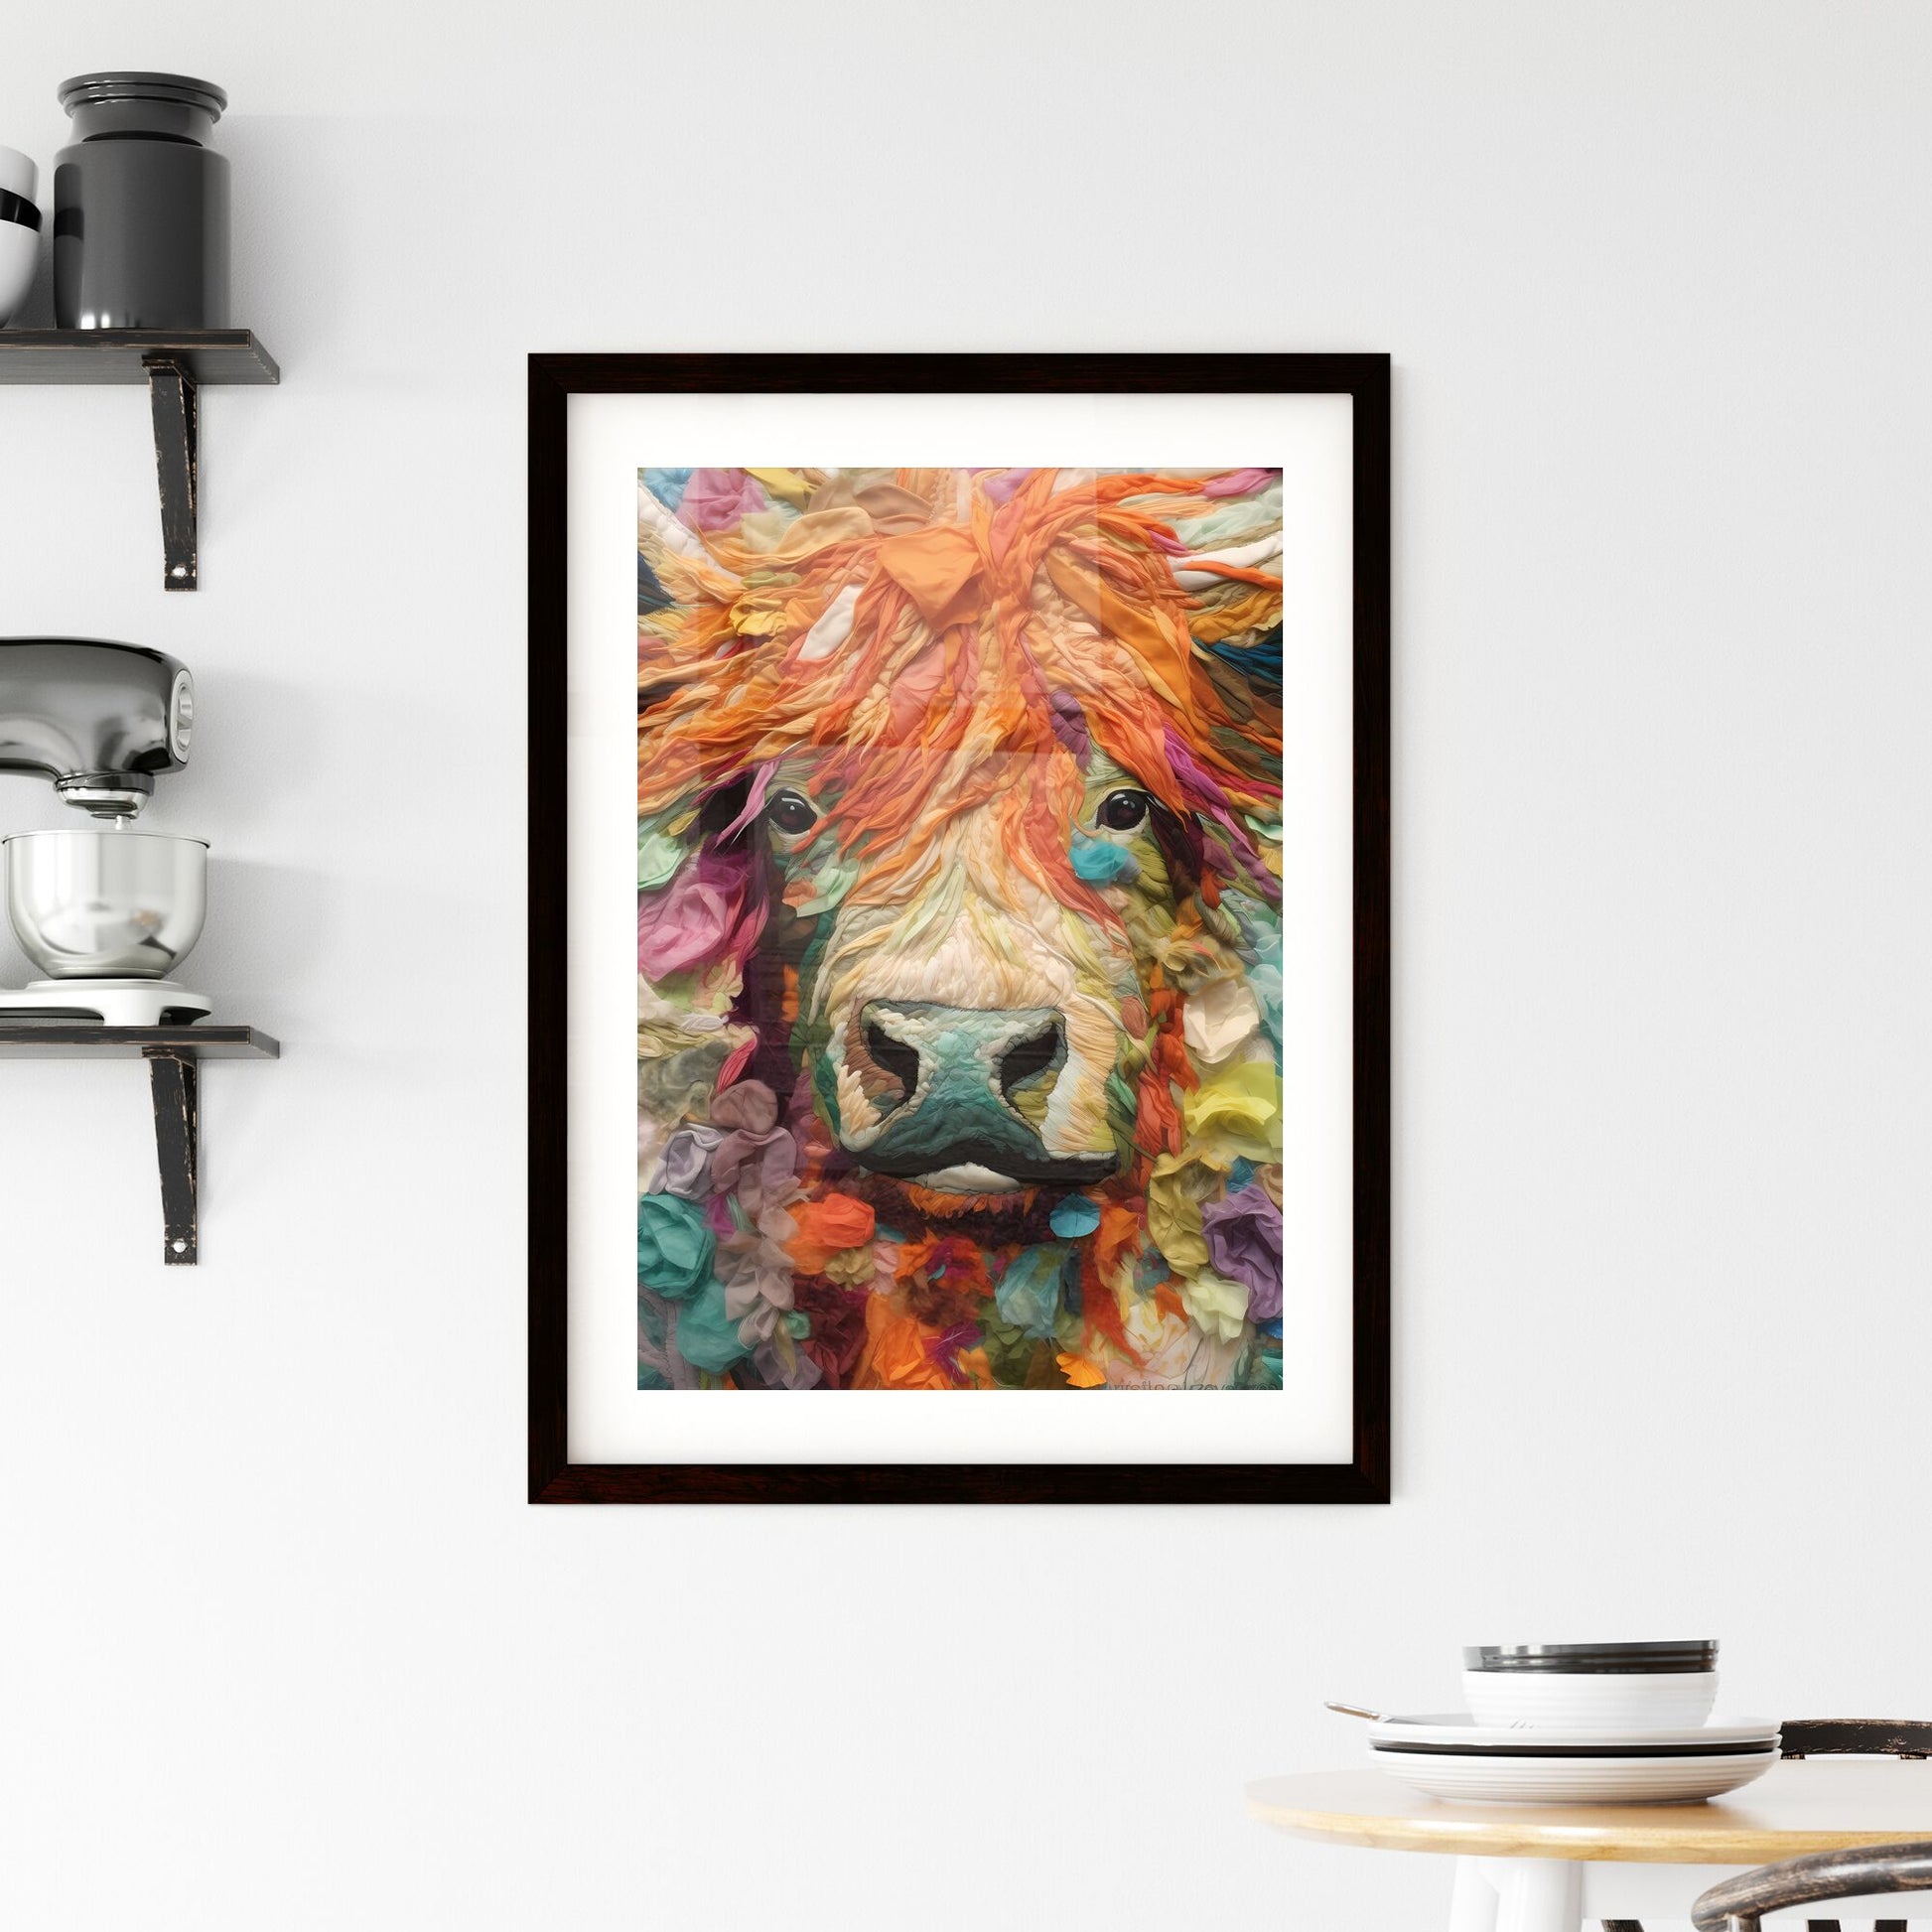 A Poster of Embroidery impasto painting highland cow - A Colorful Fabric Art Of A Cow Default Title